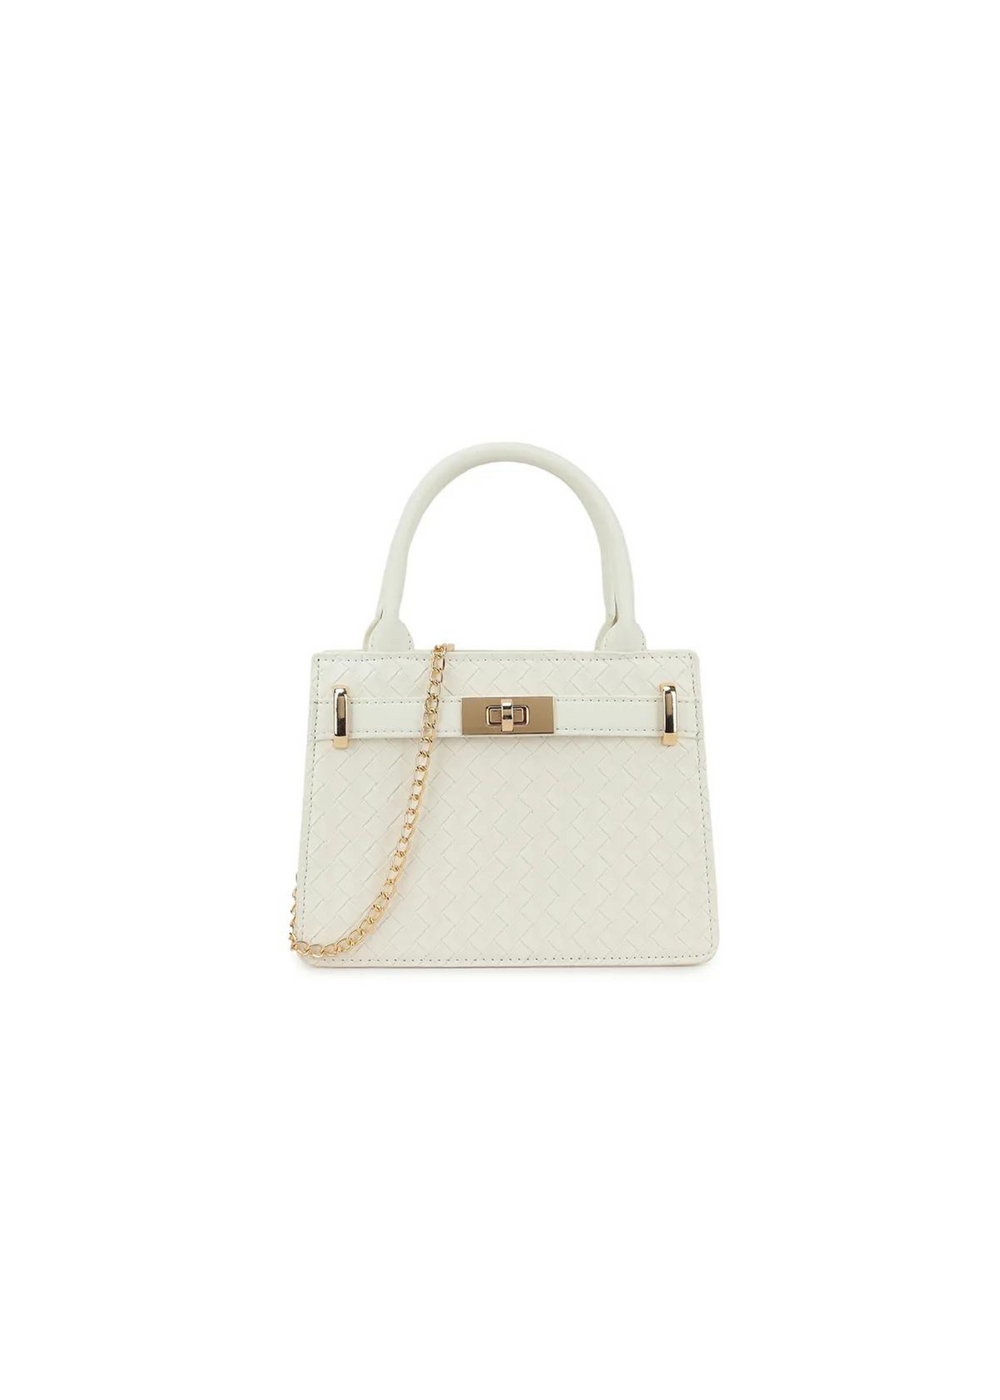 CLASSIC SMALL BAG WITH GOLD TWIST LOCK AND CROC-EFFECT IN WHITE FAUX LEATHER